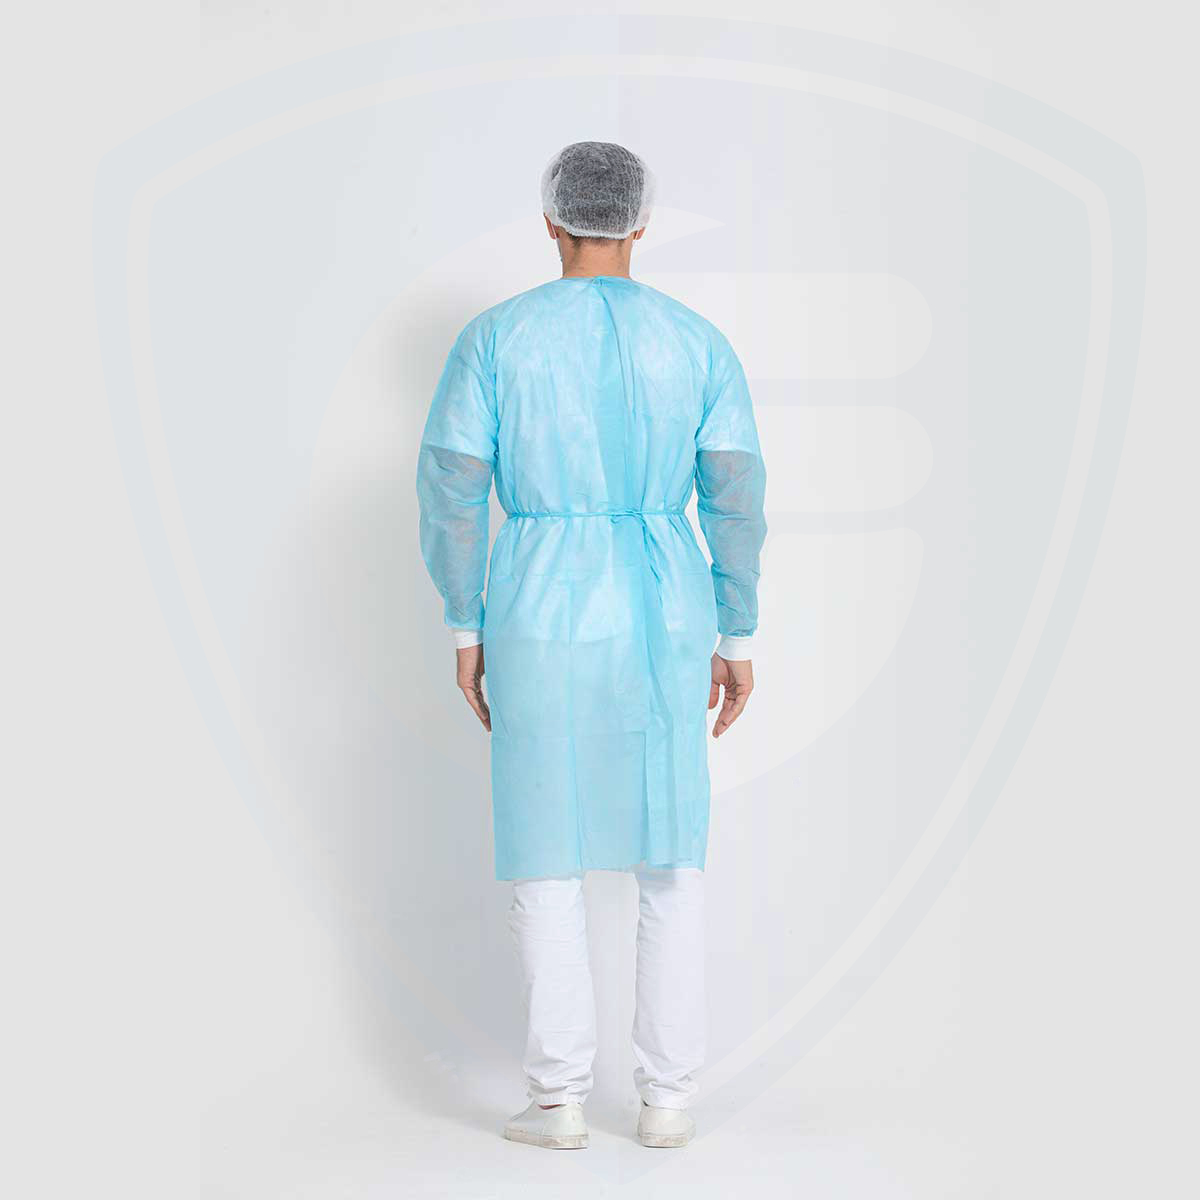 Blue 25gsm Polypropylene Disposable Surgical Gown with Knit Cuff